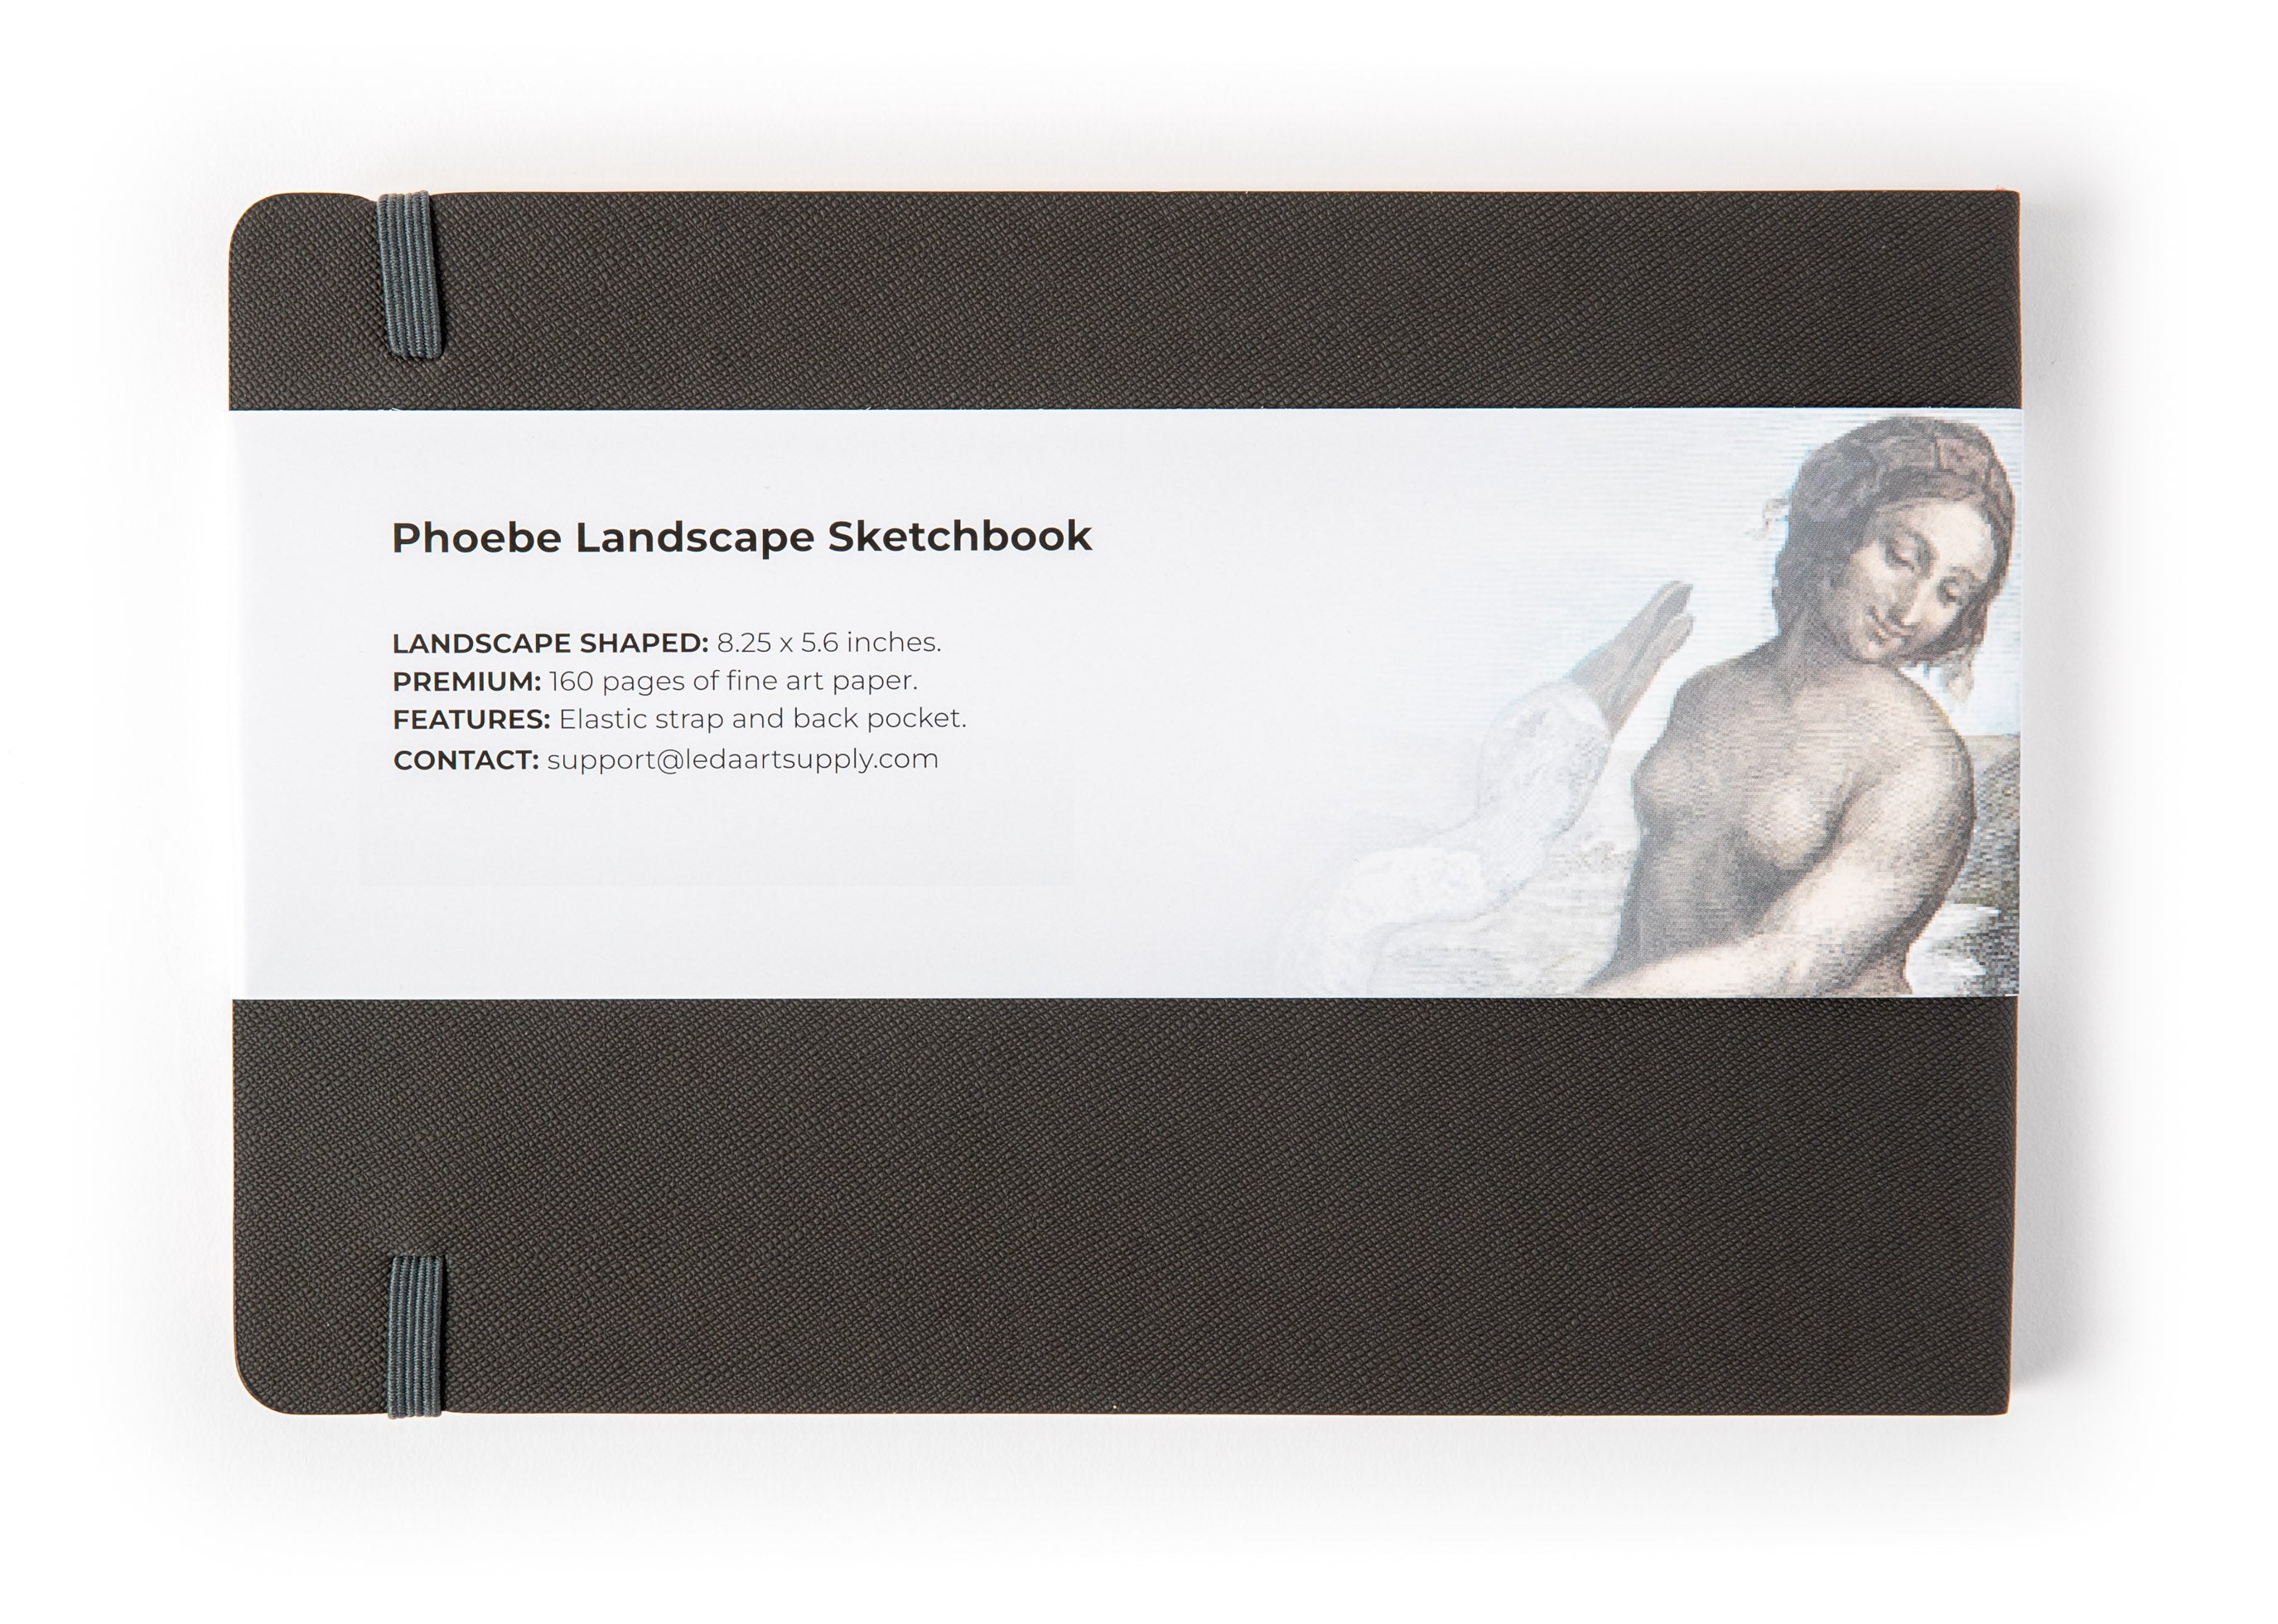 Landscape-Shaped Sketchbook, 8.25 x 5.5 inches, Lays Flat Flexible Sketchbook for artists, Ideal for Ink, Water Color, Pen, Pencils, 160 Premium Art Pages